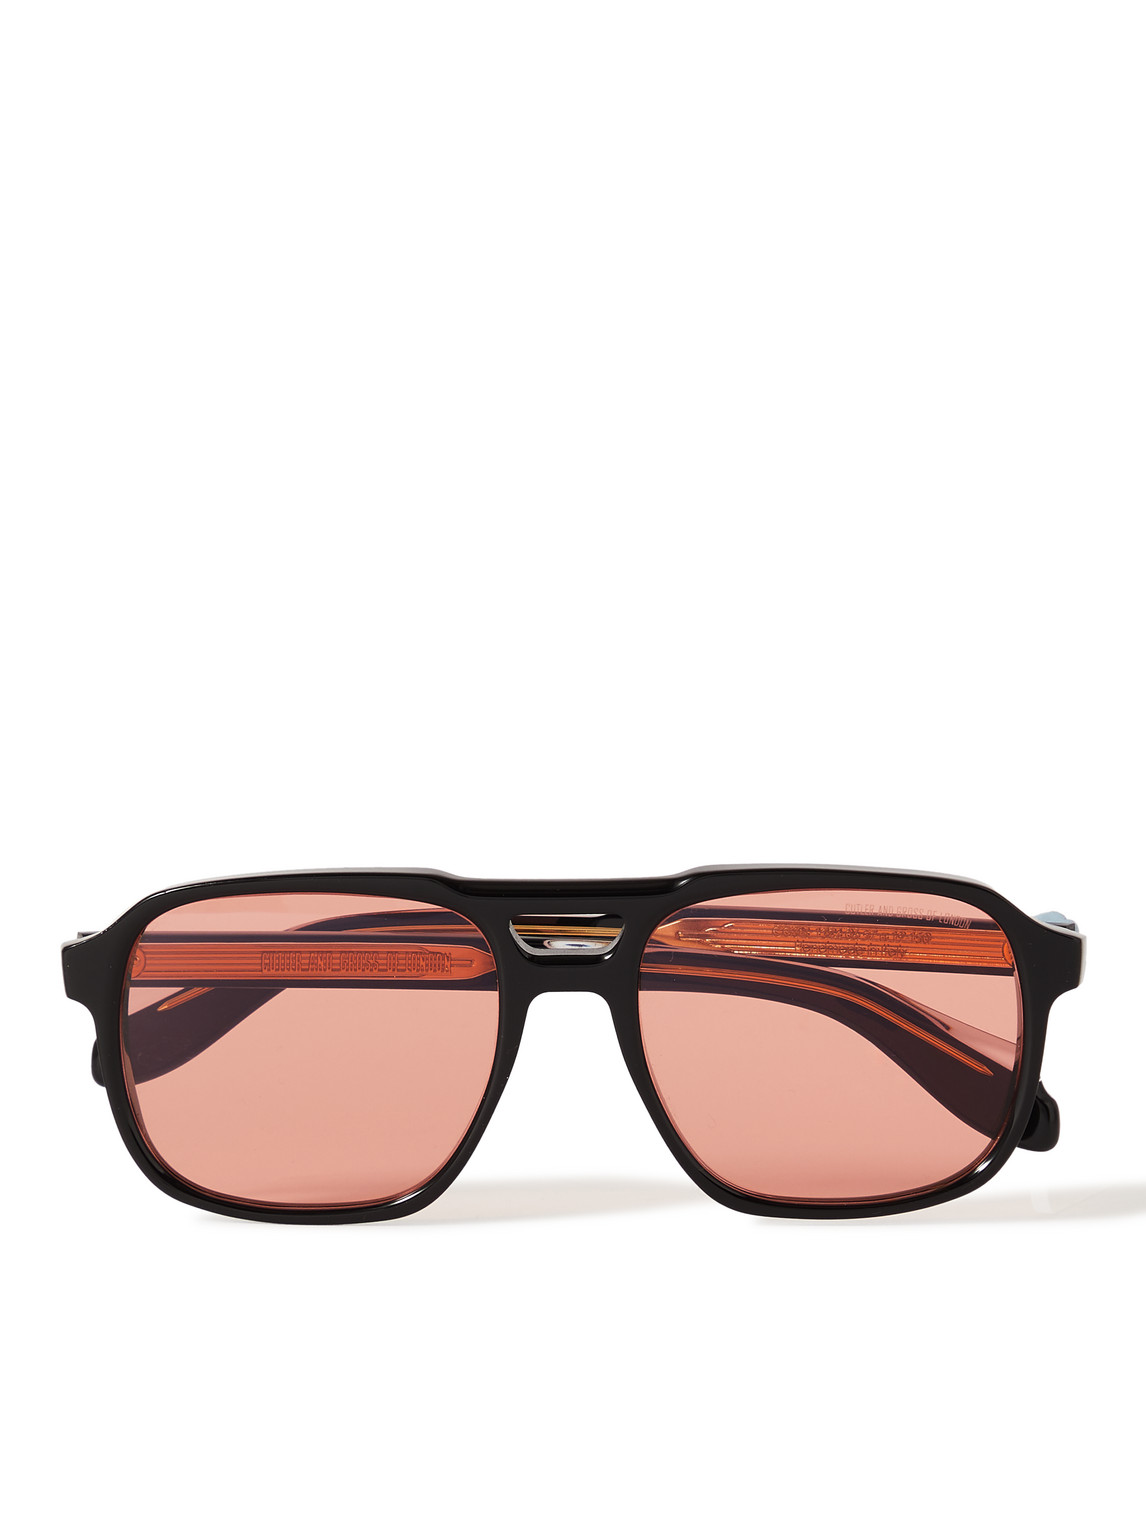 Cutler And Gross 1394 Aviator-style Acetate Sunglasses In Black